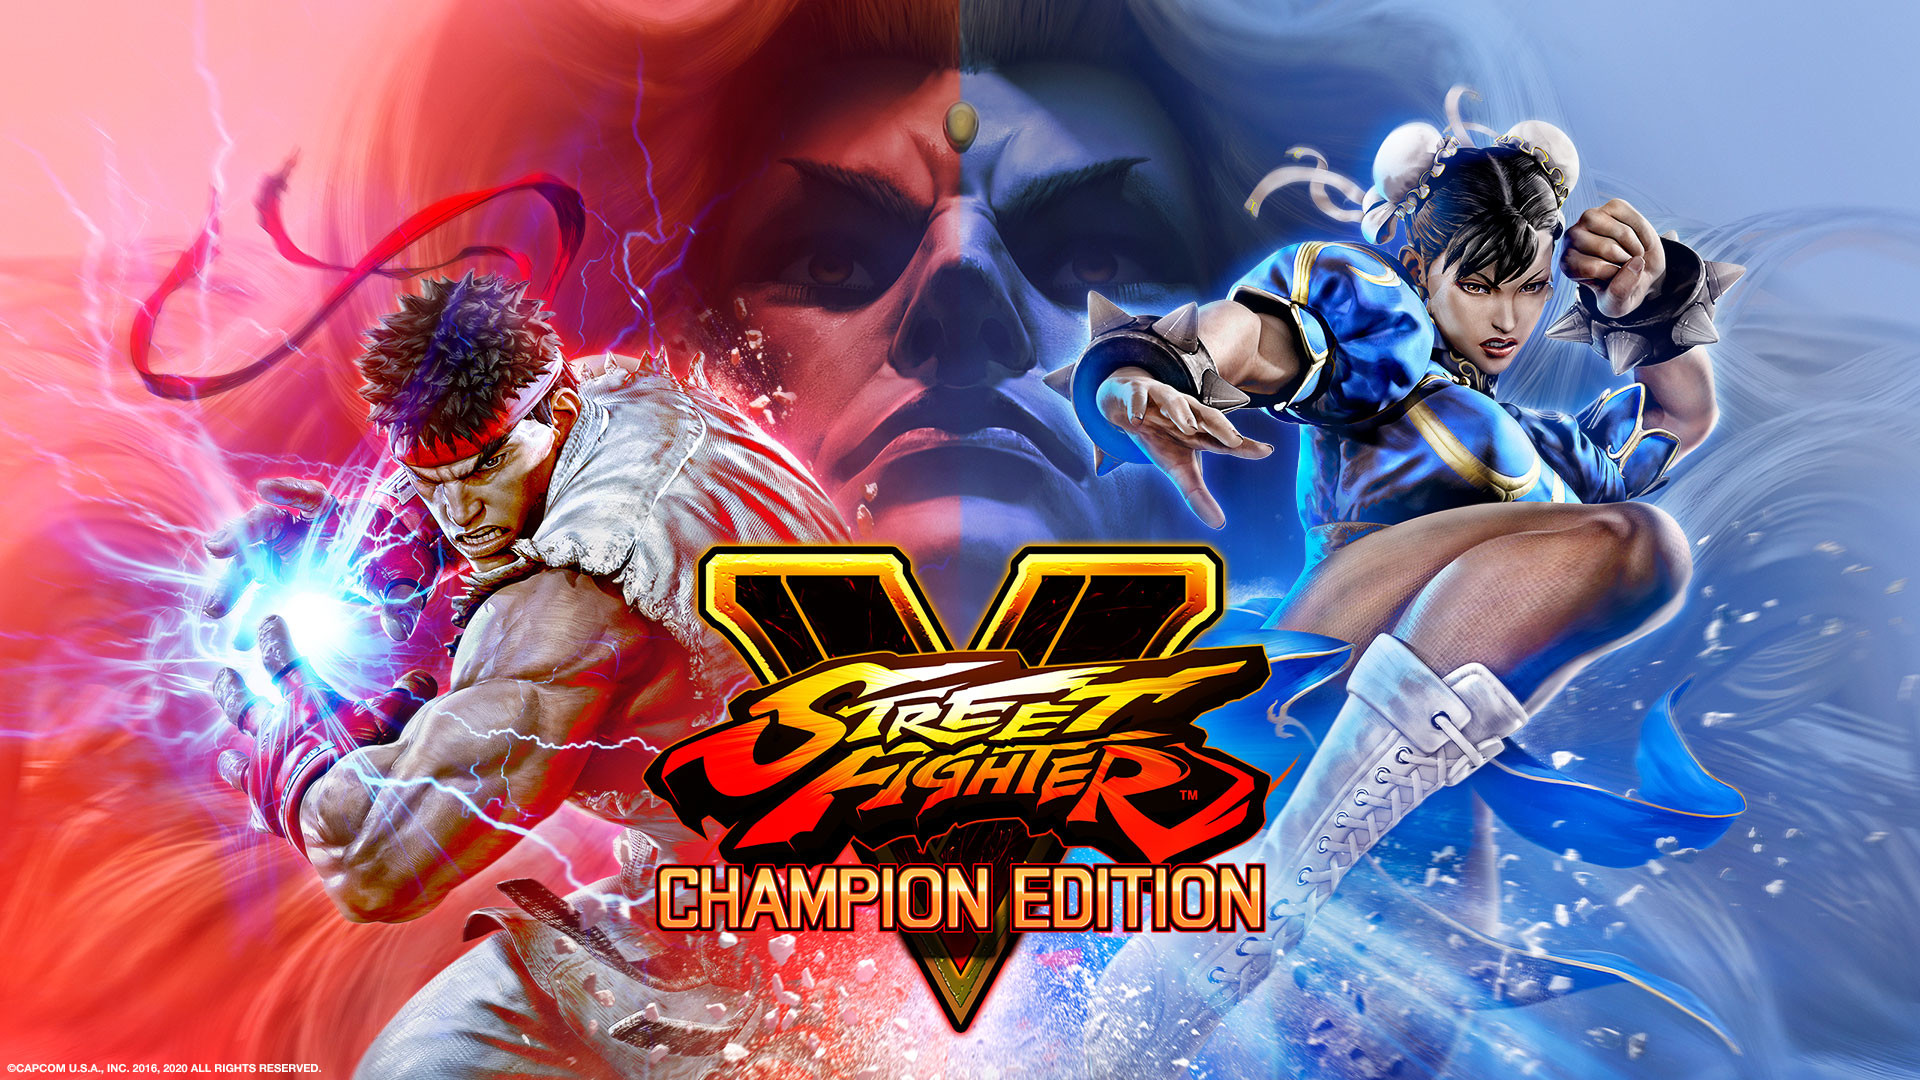 Street Fighter V - Champion Edition Special Wallpapers on Steam